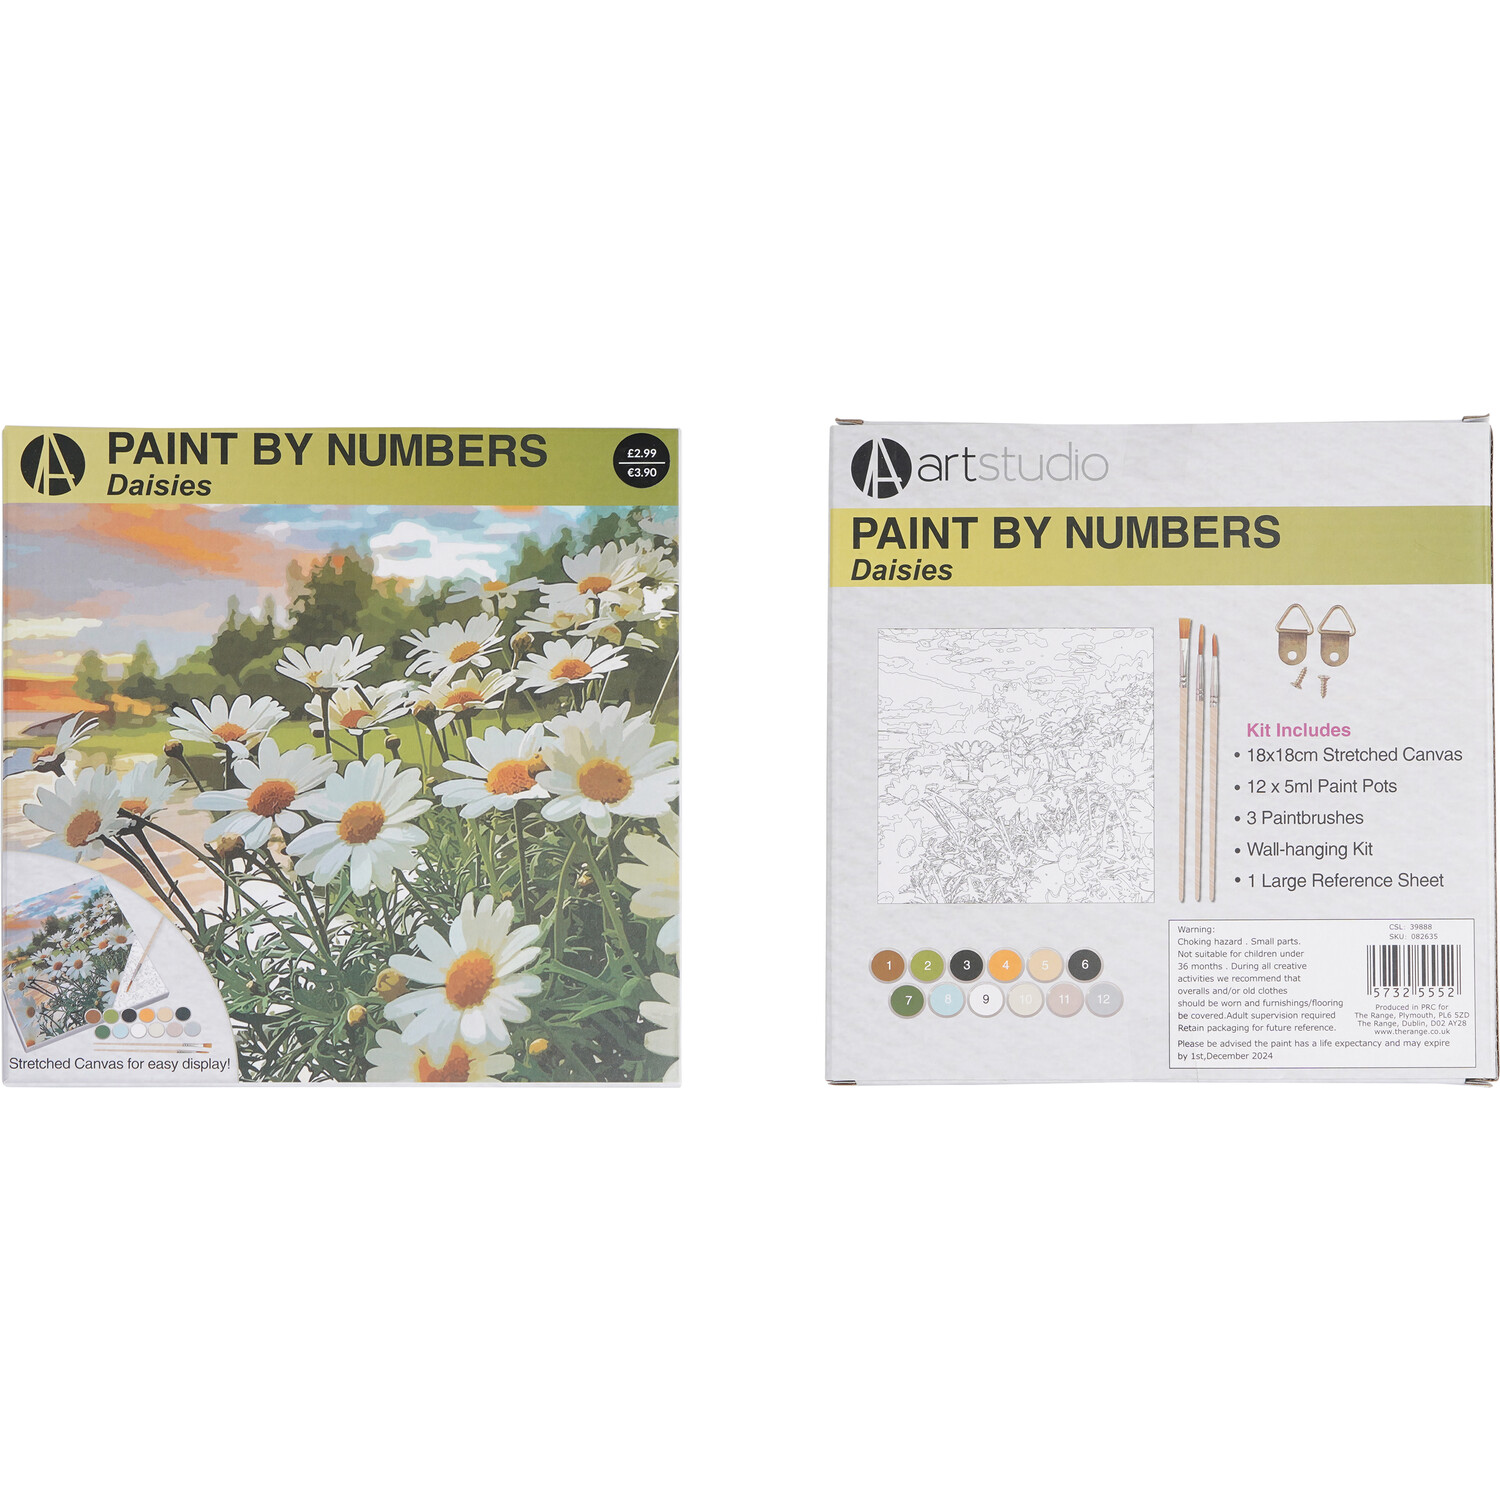 Art Studio Paint by Numbers - Daisies Image 2